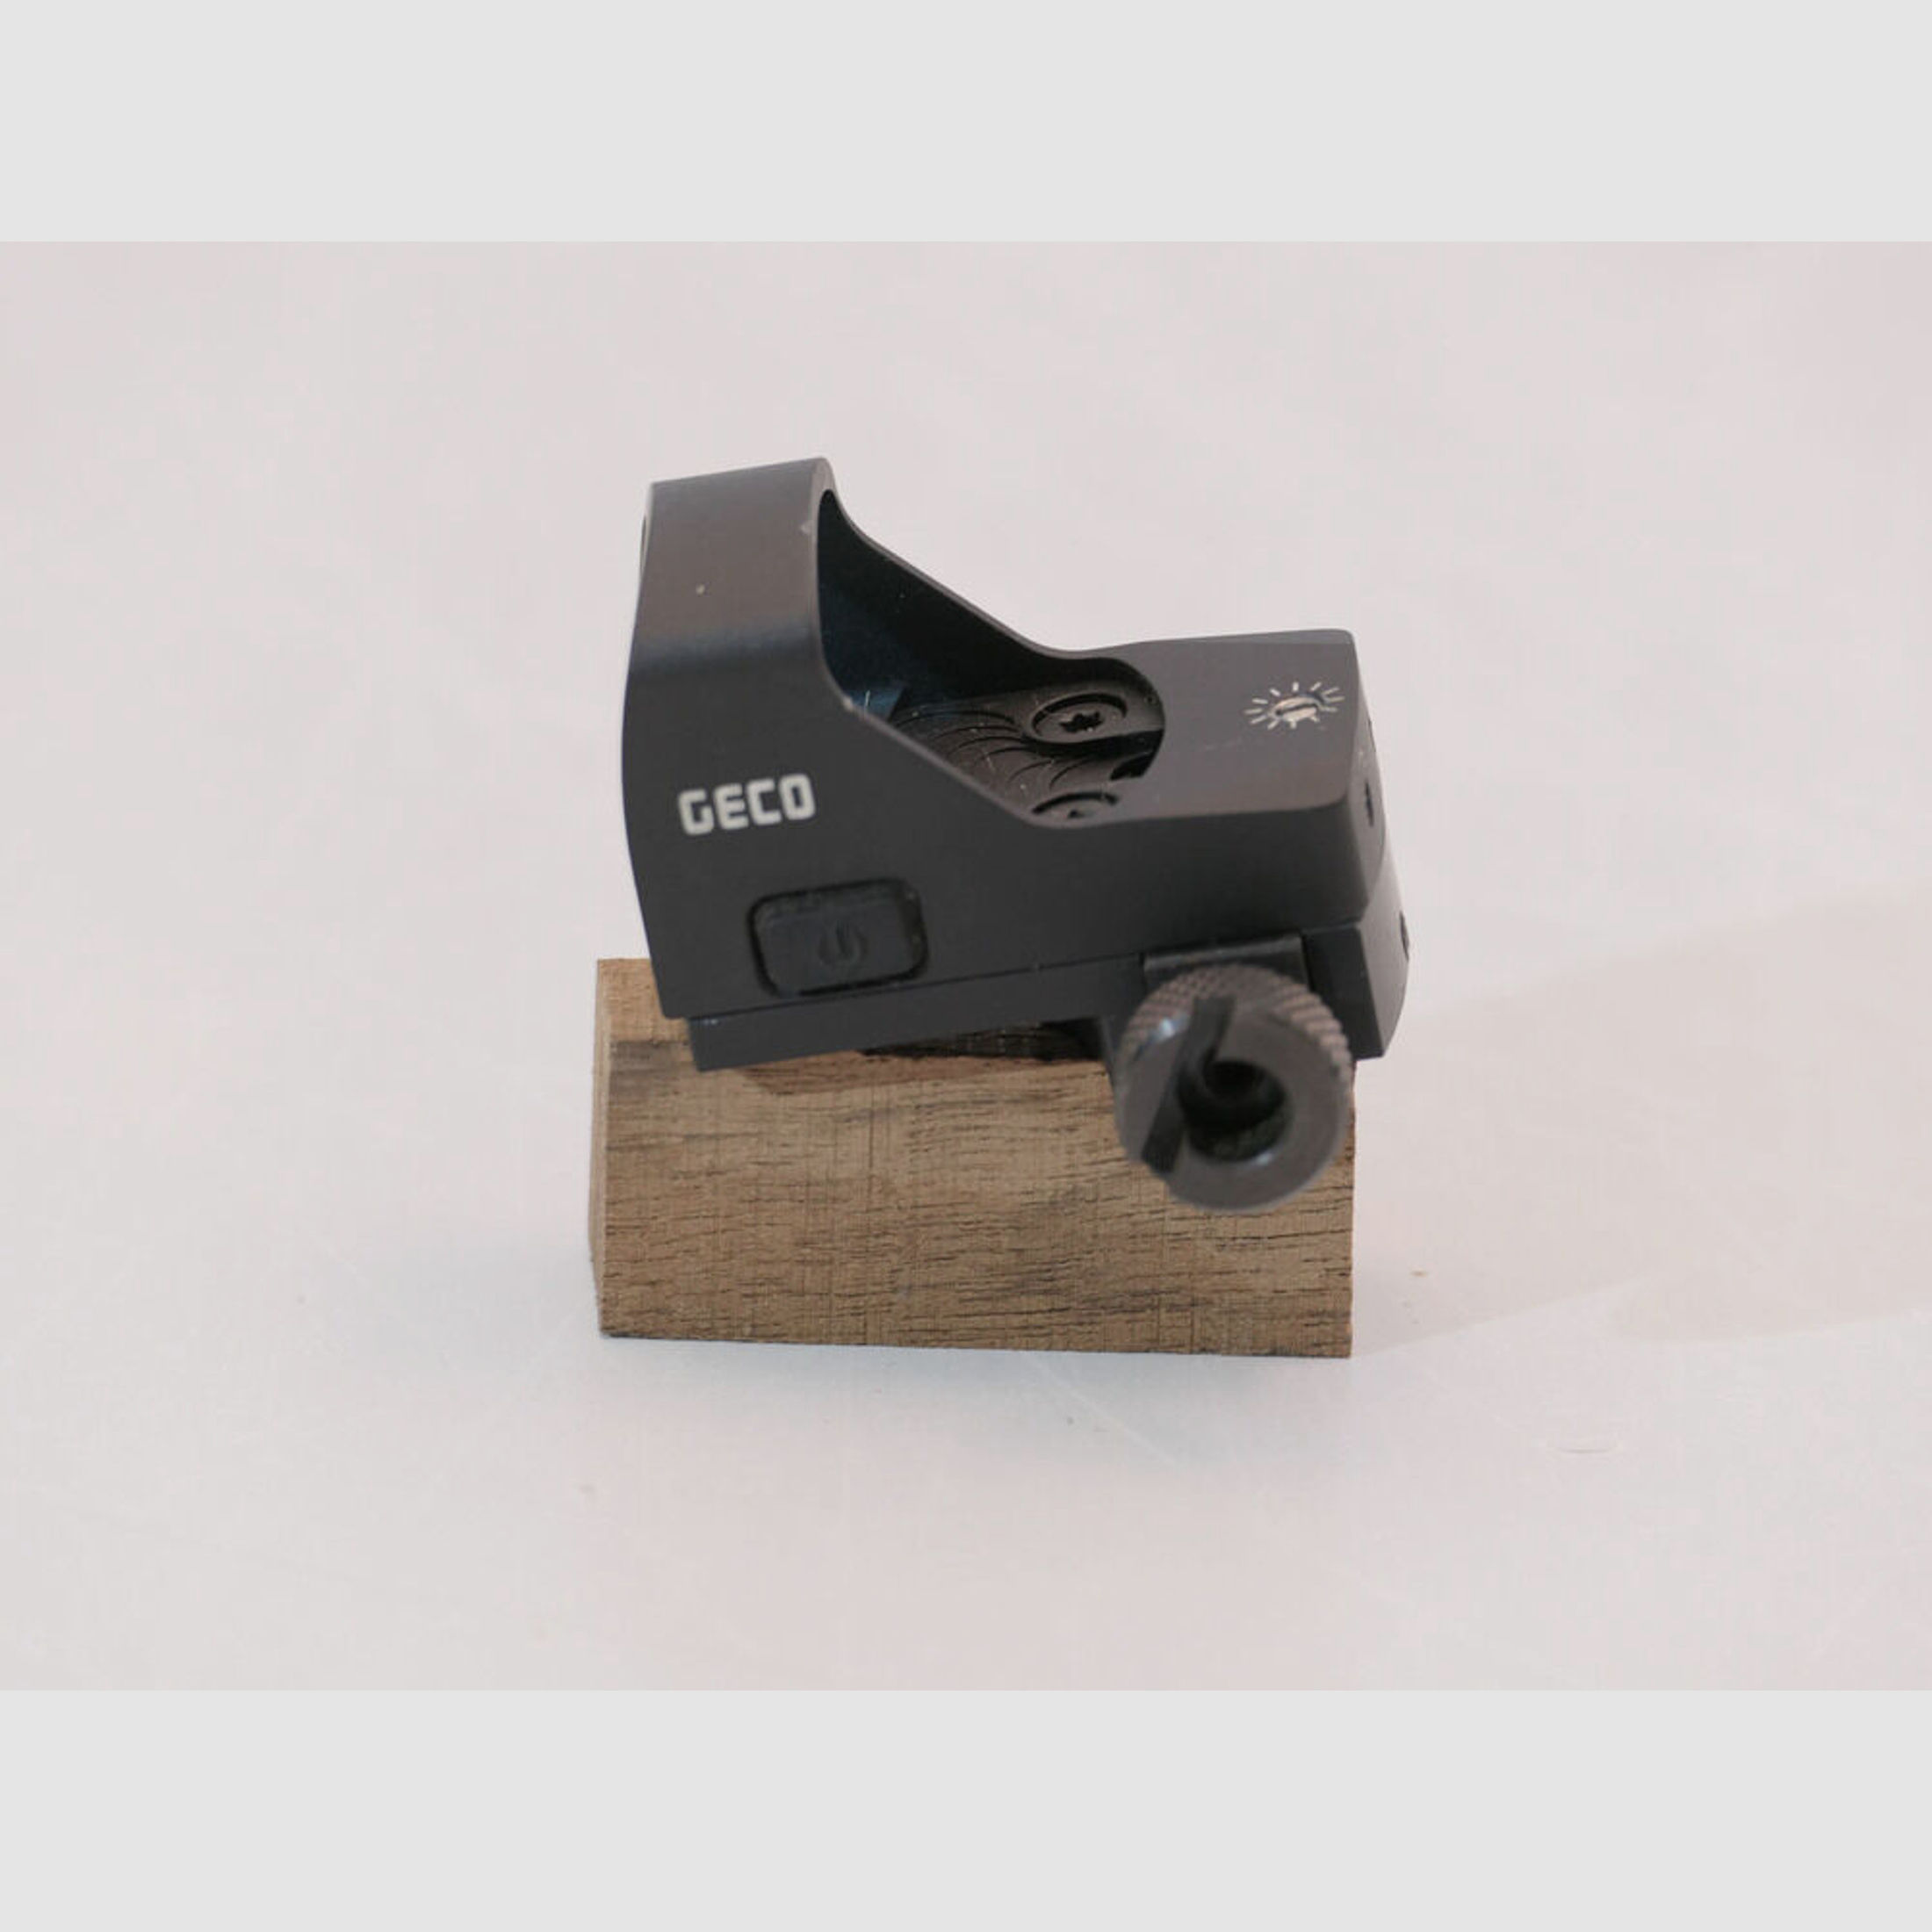 Geco	 Open Red Dot Sight